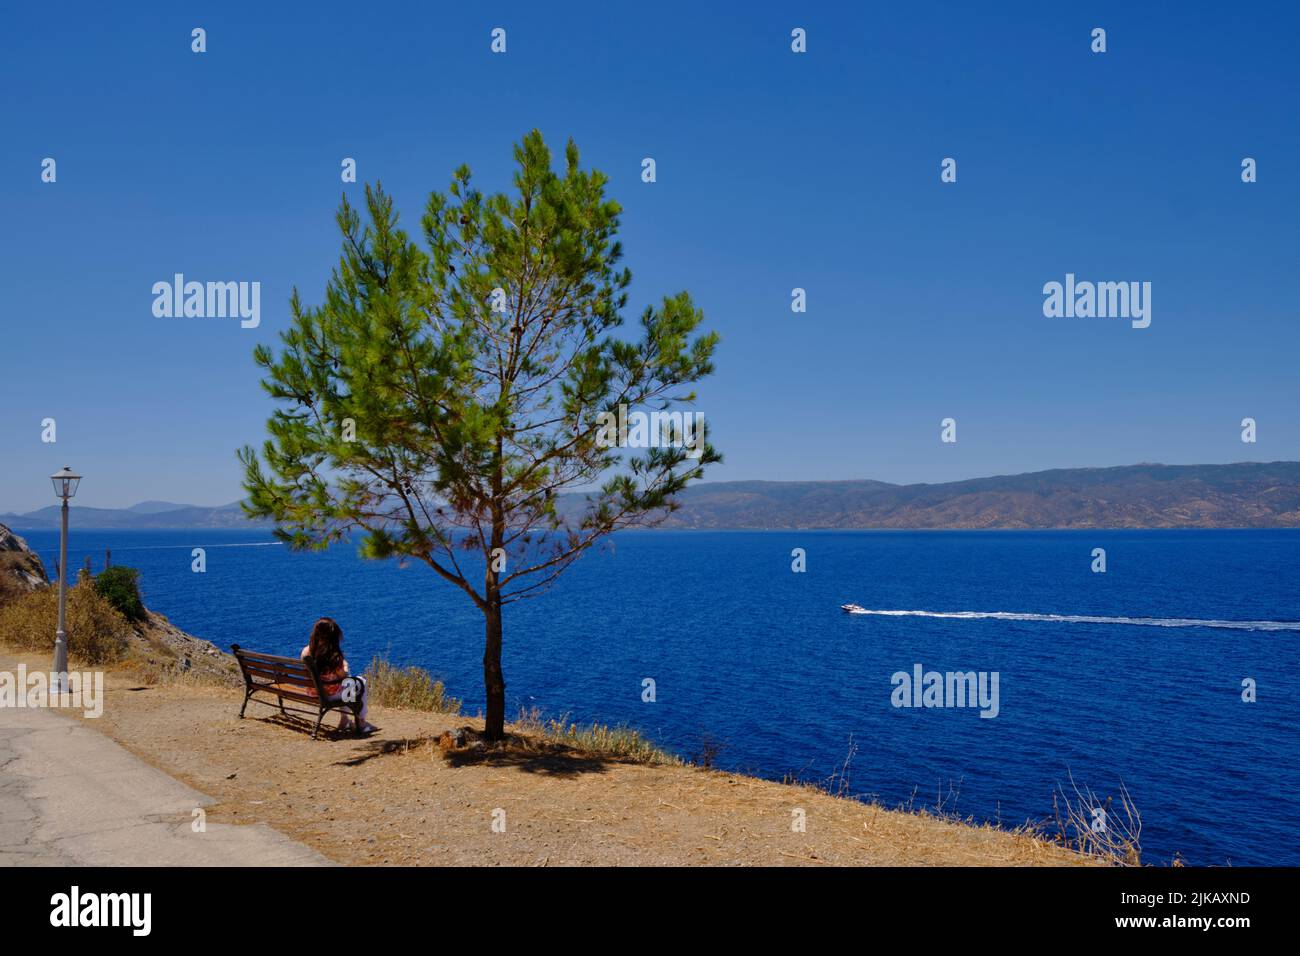 Tourist taking in the views on the island of Hydra in Greece in Summer Stock Photo